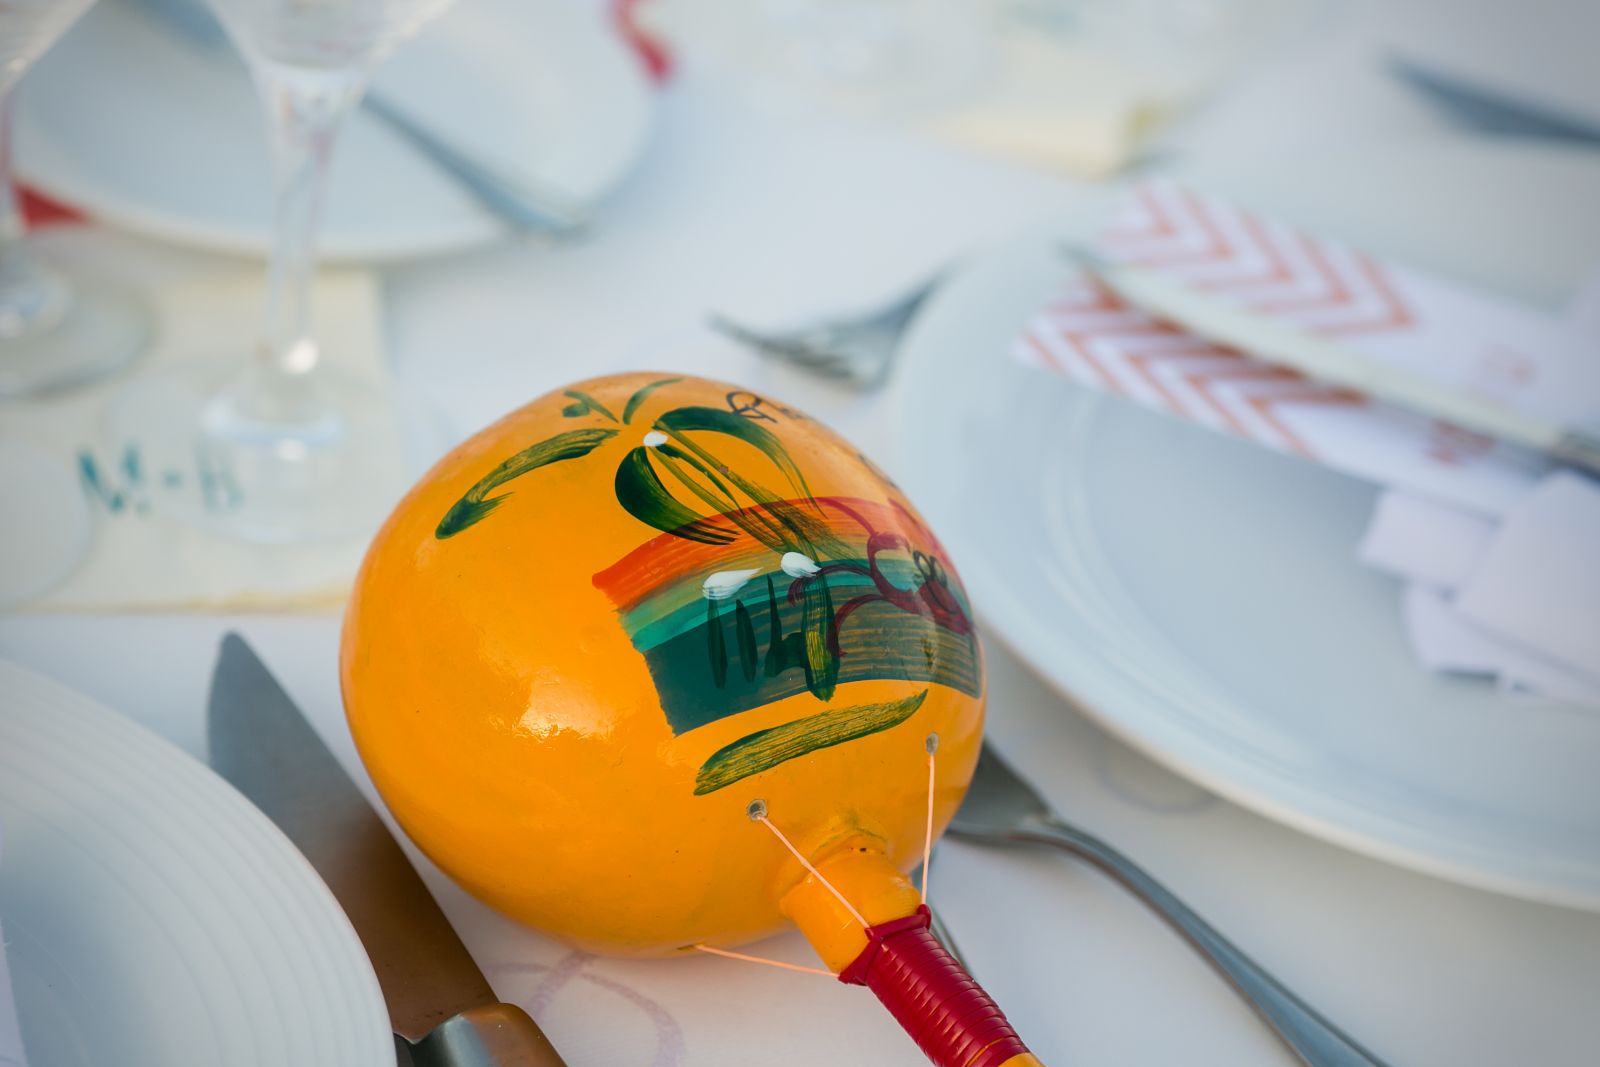 We bought the wooden maracas on 5th Ave. in Playa, and used them as our wedding favors - we put one out at each place setting.